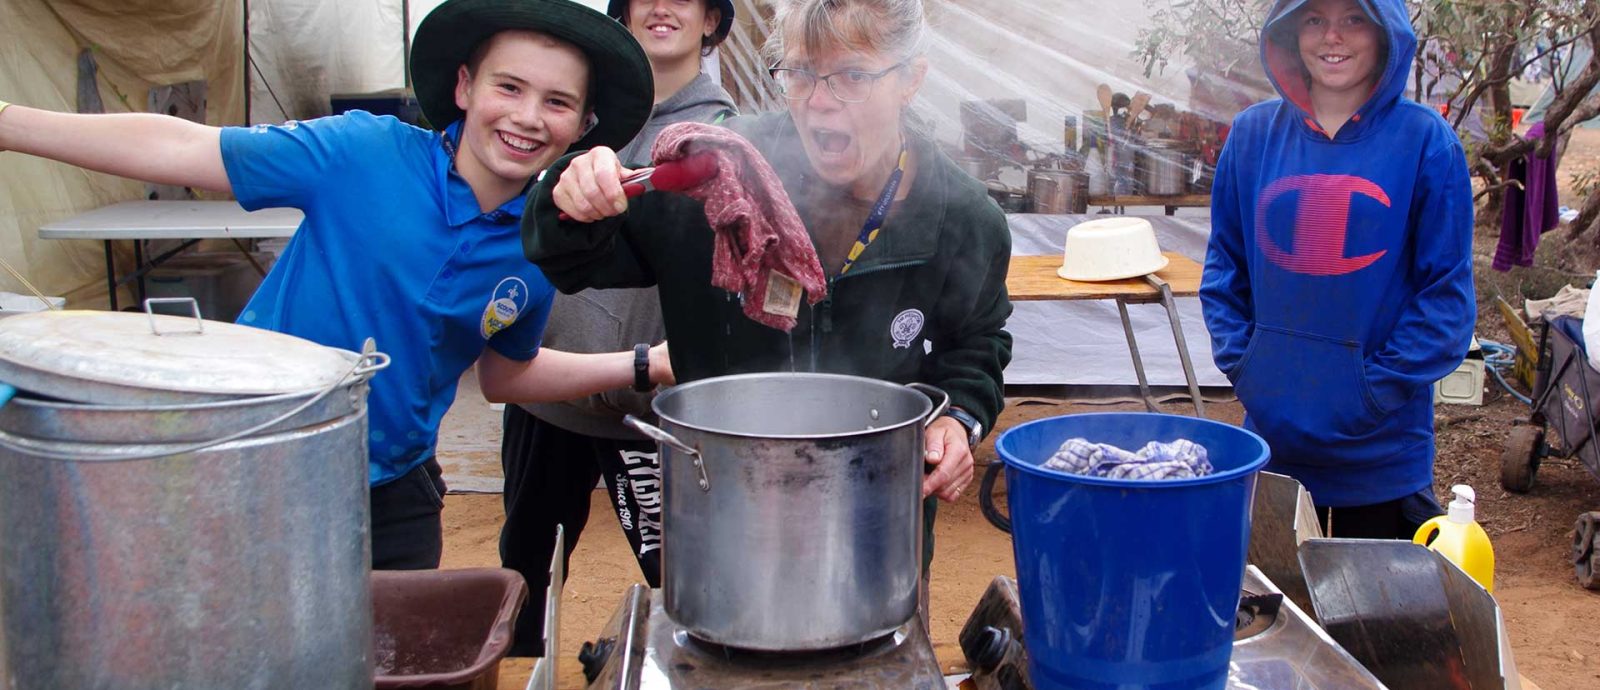 scouts-kids-cooking-boiling-pots